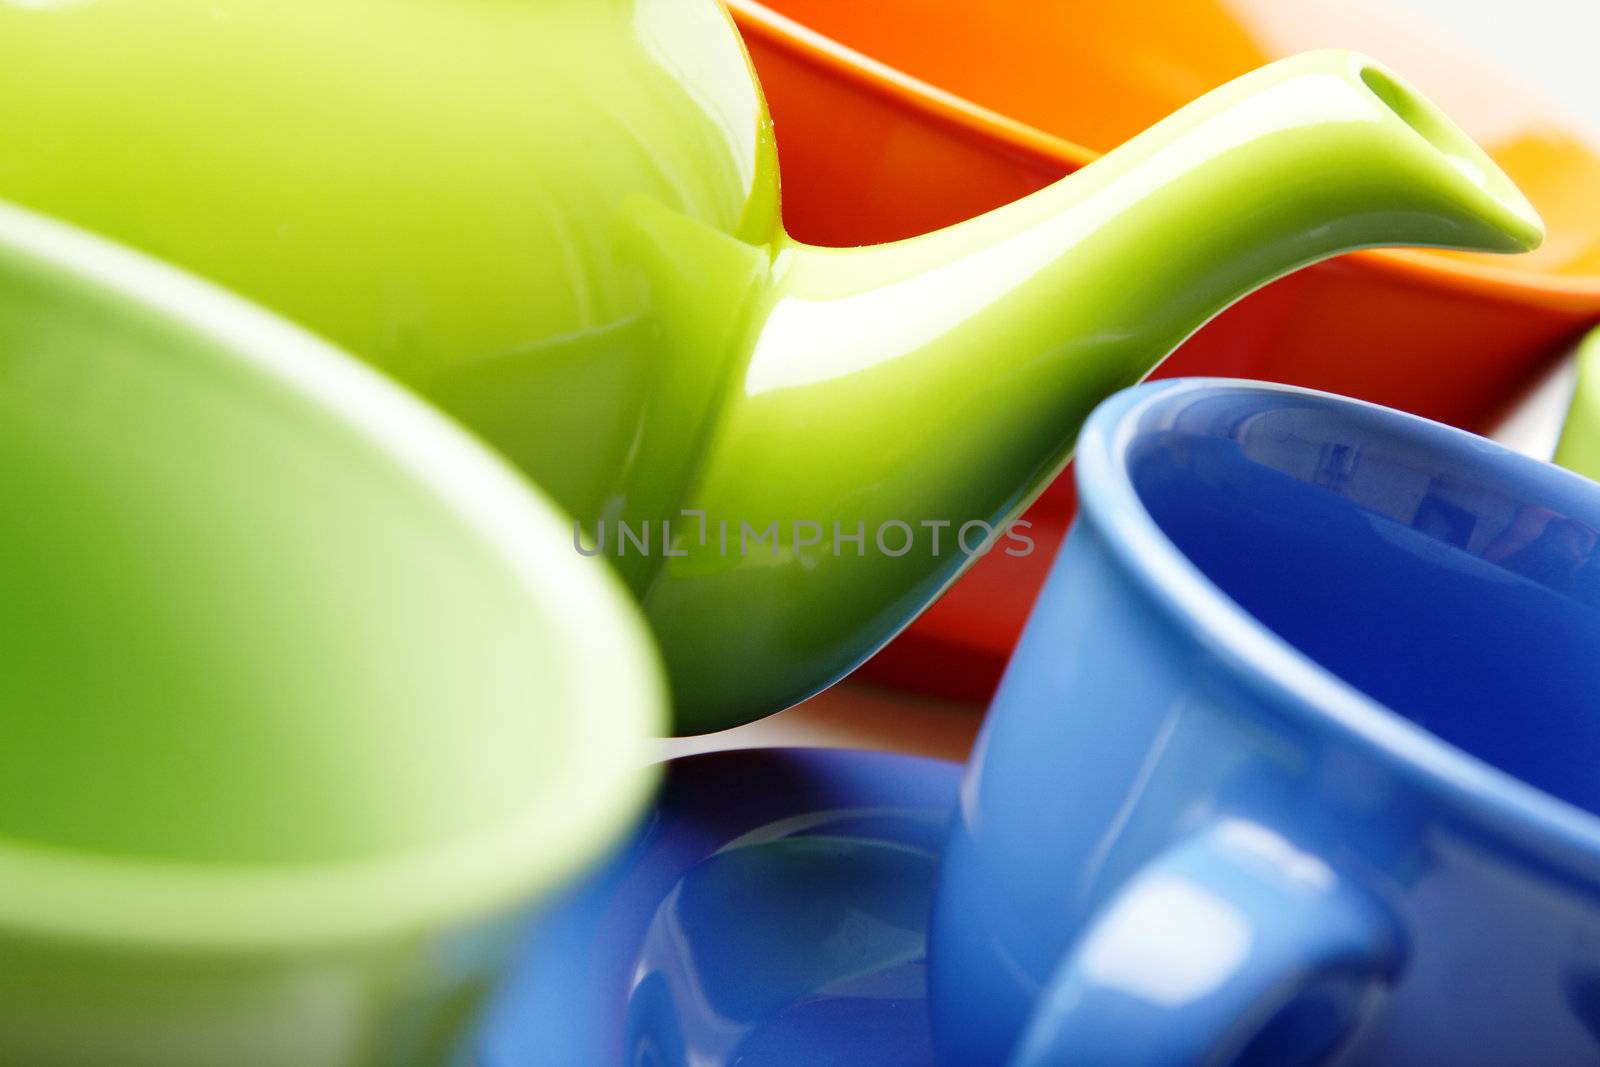 Close-up photo of the fragment of tea service consisting of teapot and cups. Natural color. Shallow depth of field added by the lens for natural view